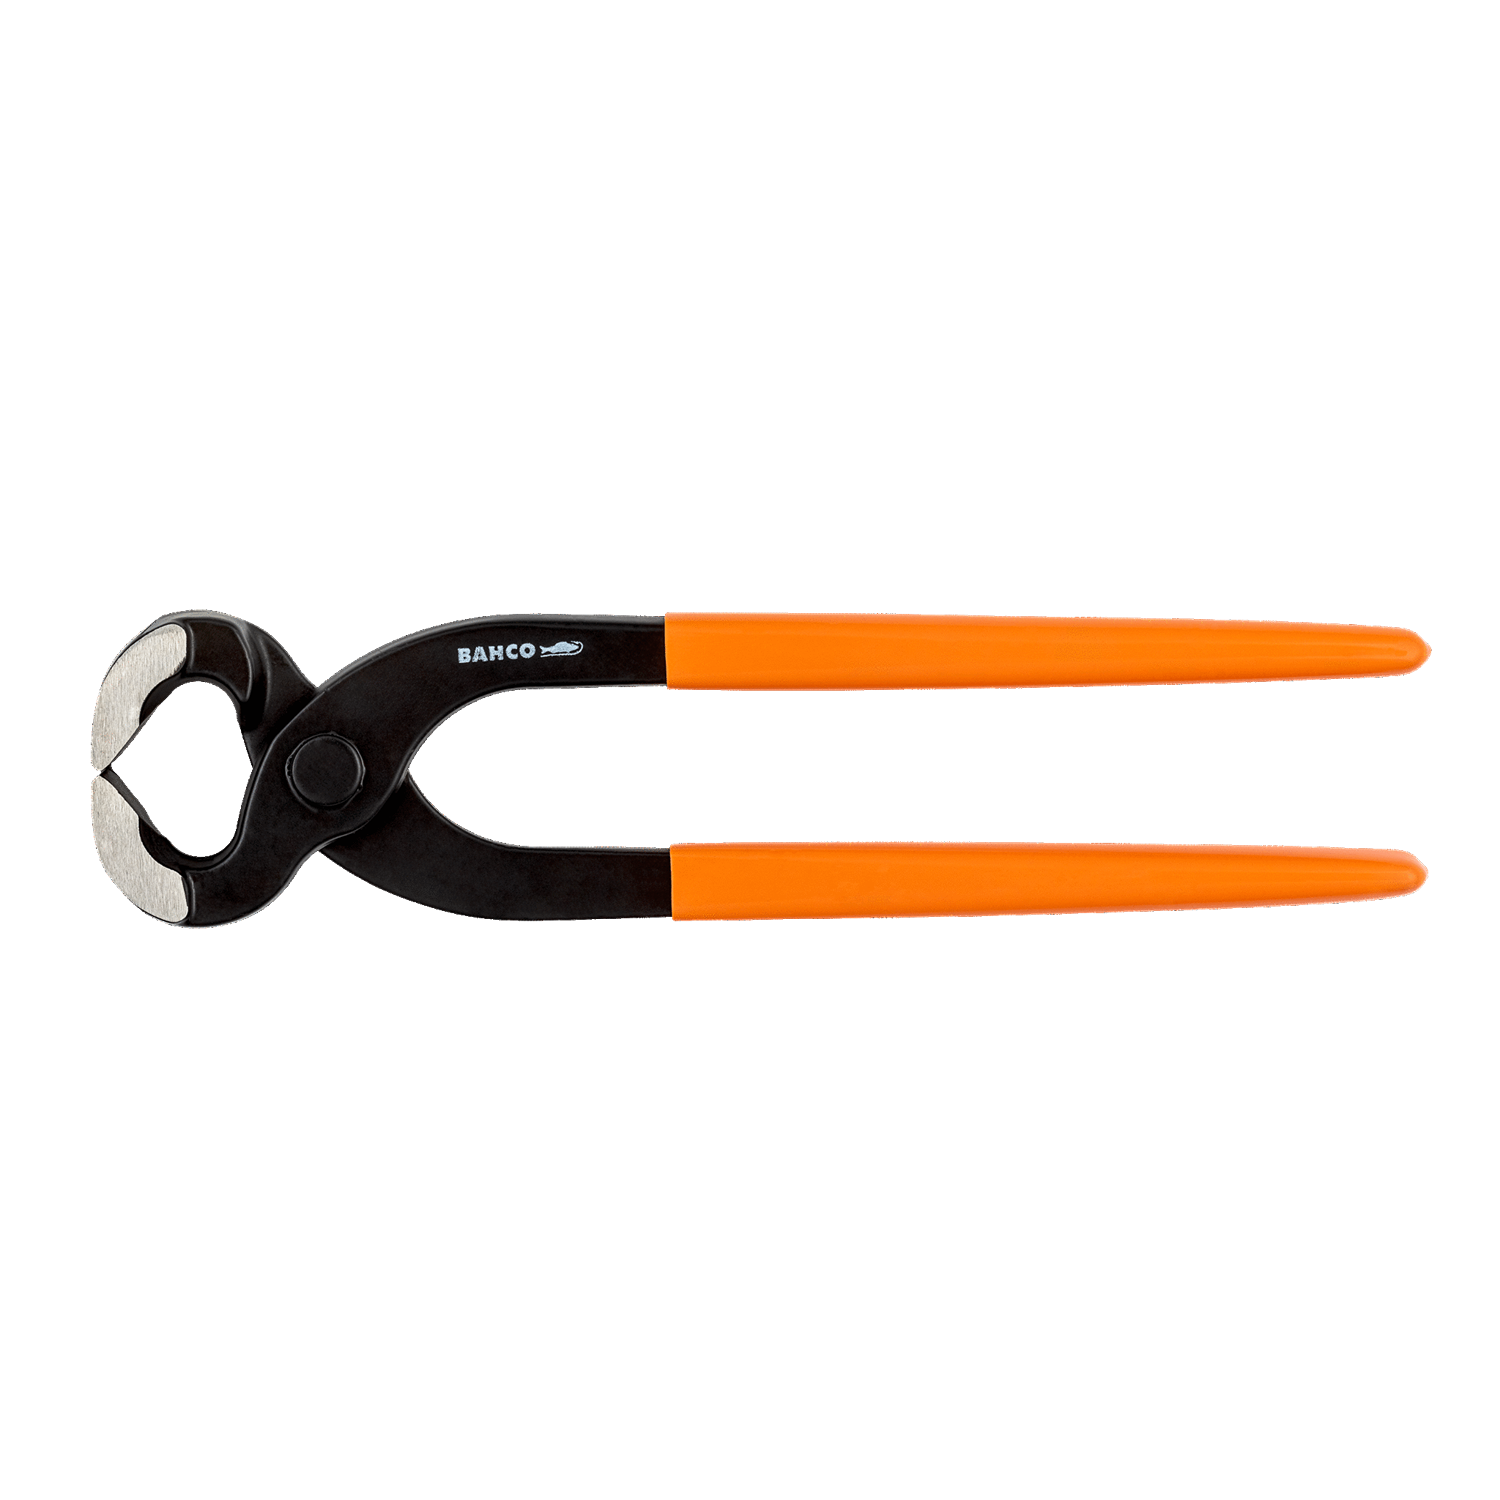 BAHCO 541D Pincer with PVC Handles Cutting Pliers - Premium Pincer from BAHCO - Shop now at Yew Aik.